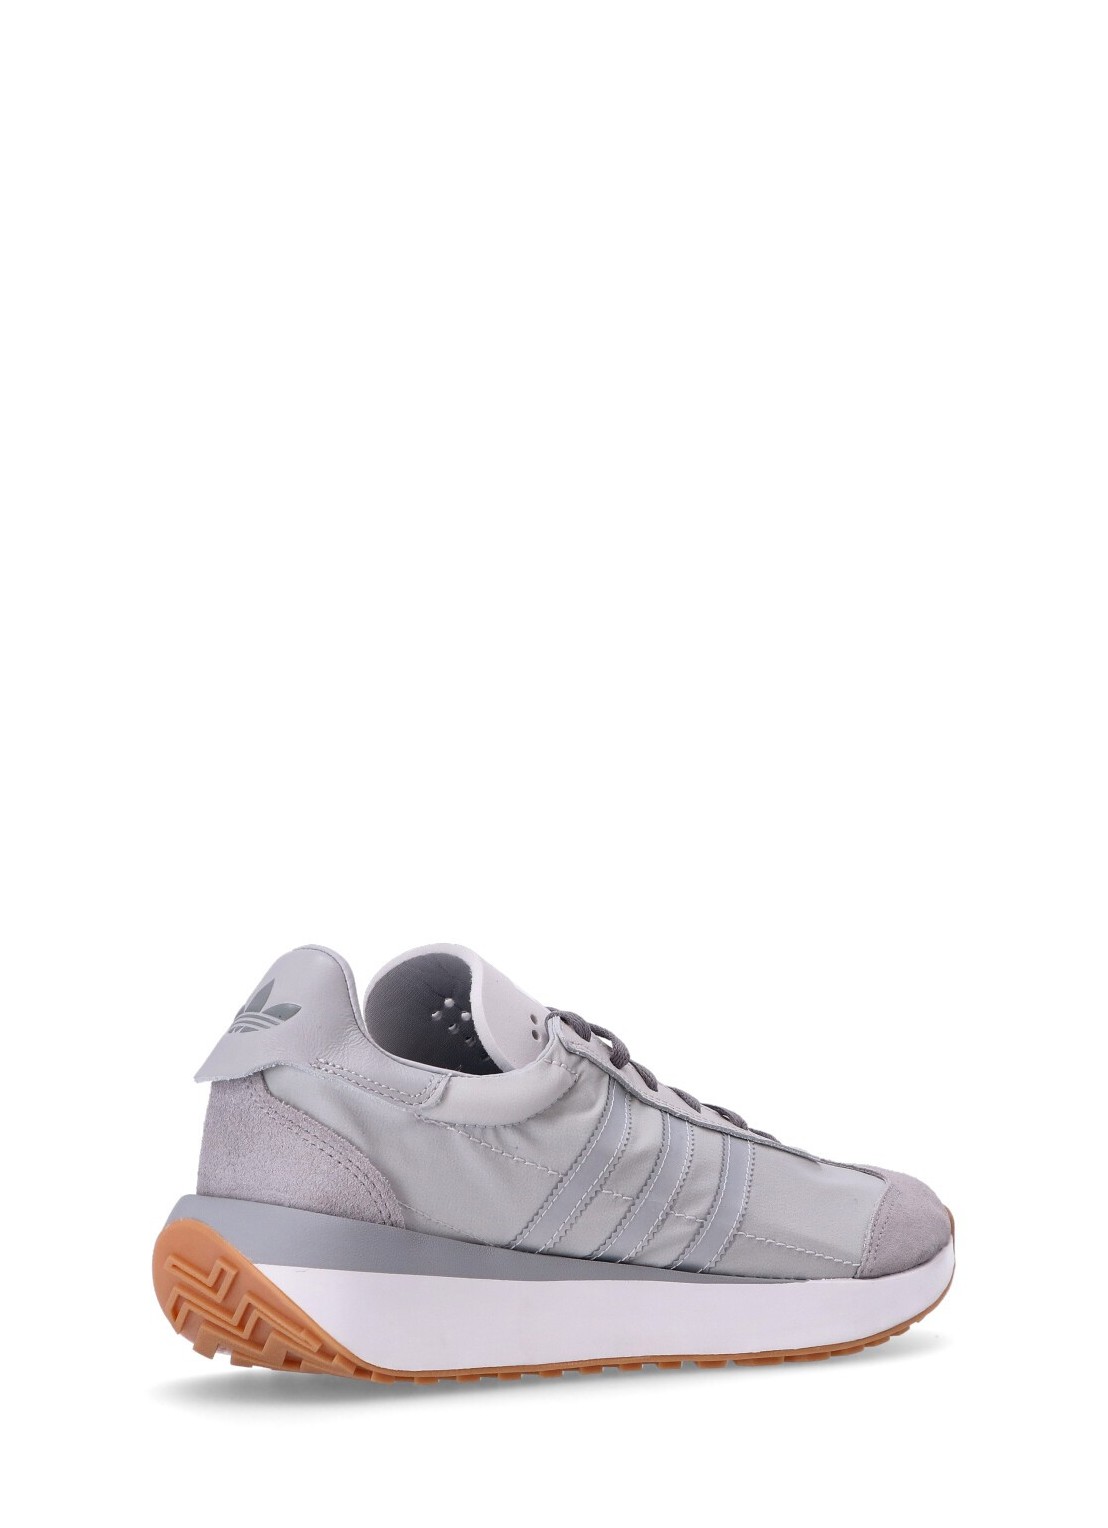 adidas originals country xlg - id0365 grey one metallic silver grey two ...